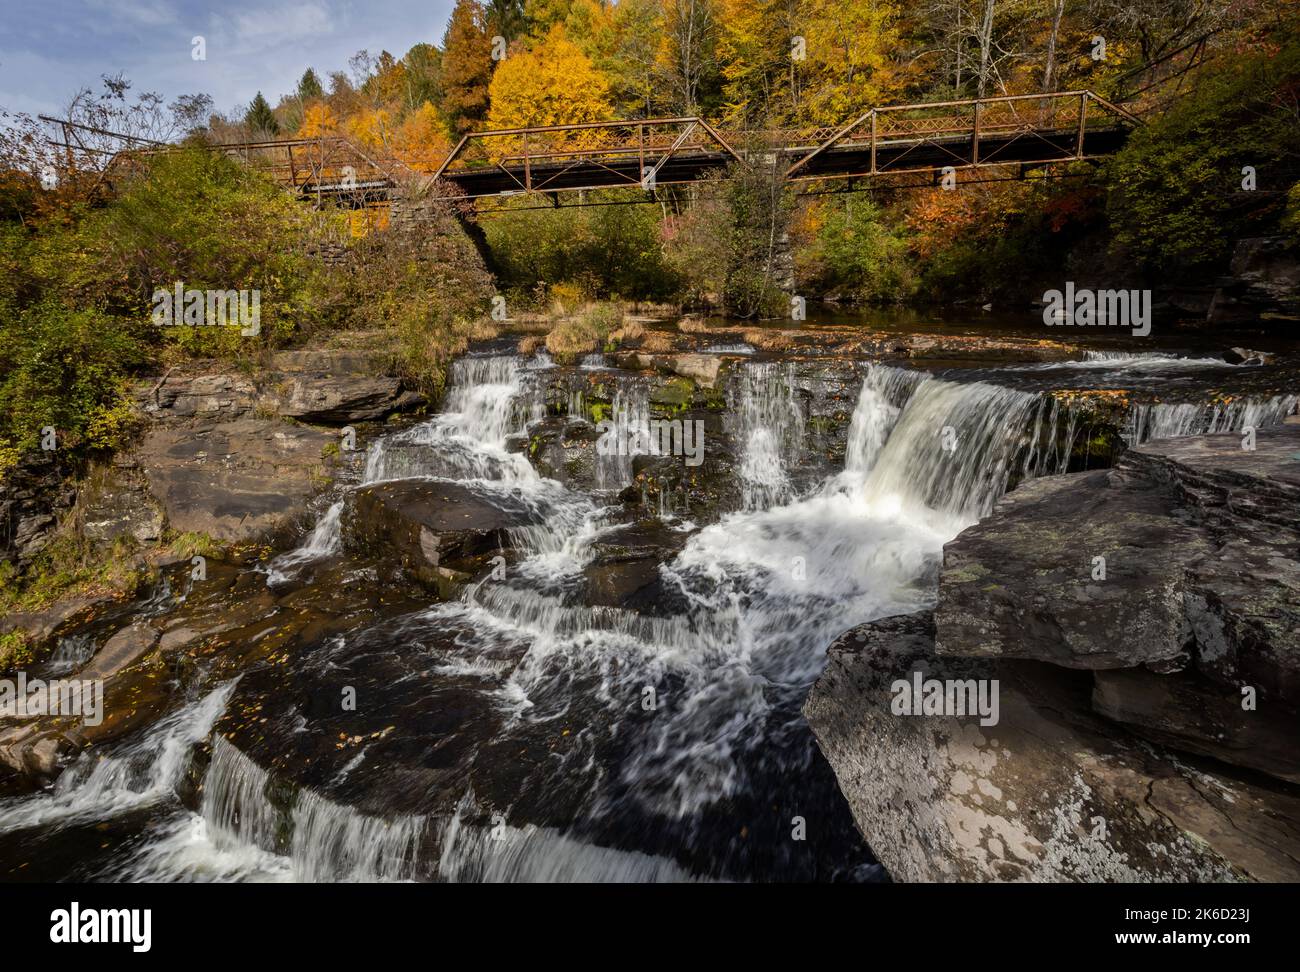 Tanners Falls in the Poconos near Honesdale, PA, on a brilliant fall day, which features multiple cascades and a historic bridge Stock Photo